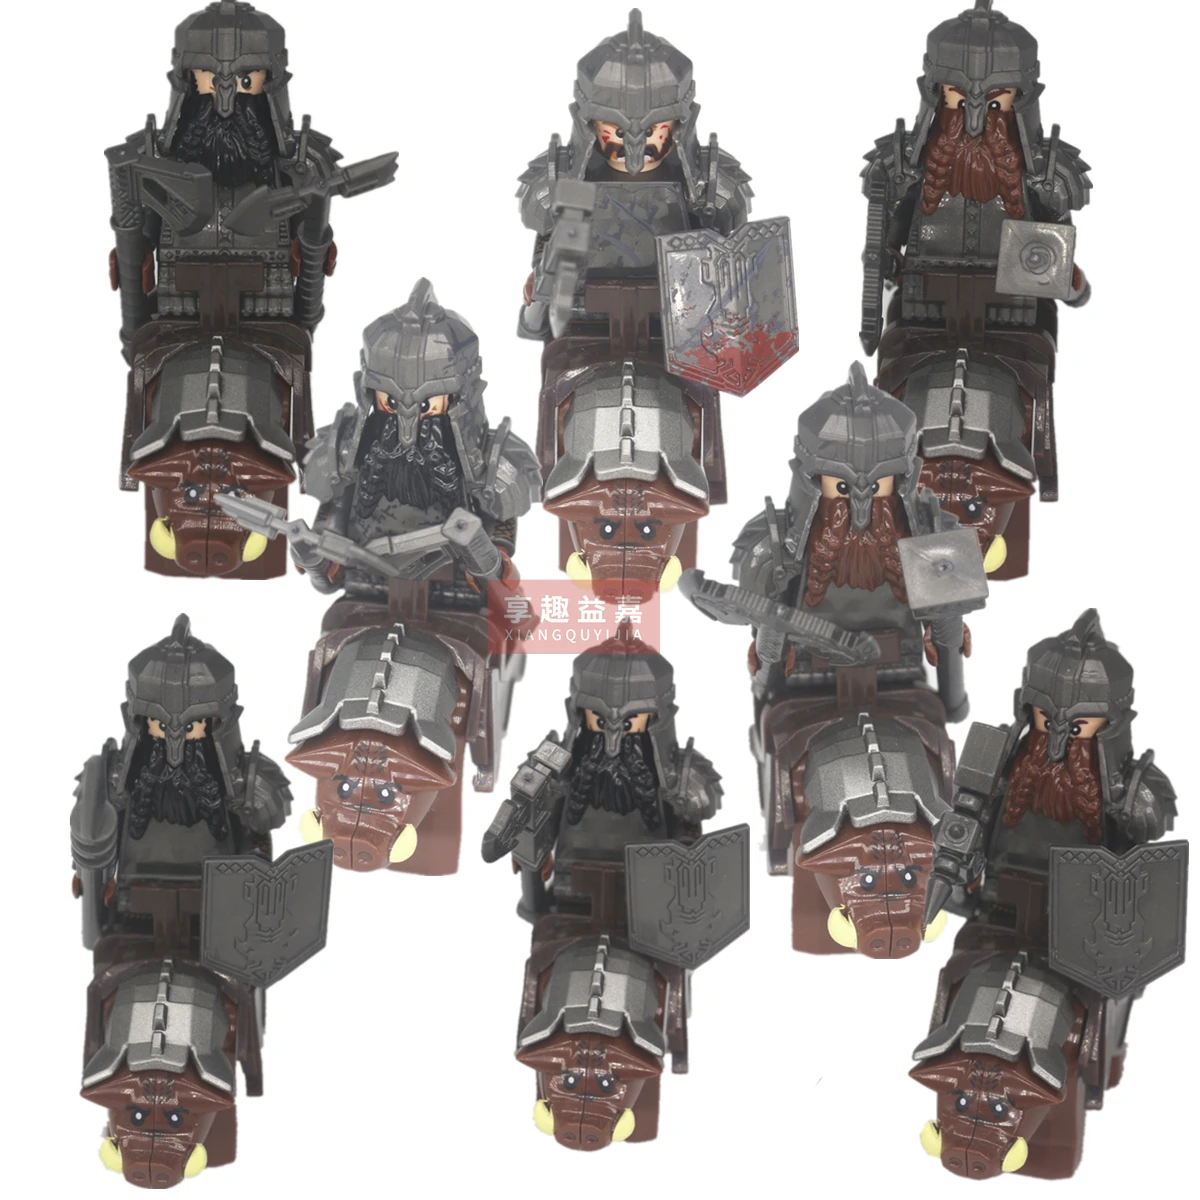 

Mini Middle Ages Lord Rings Elves Orcs Army Dwarf Rohan knight figure Game Thrones building blocks kids toys gift building bloc